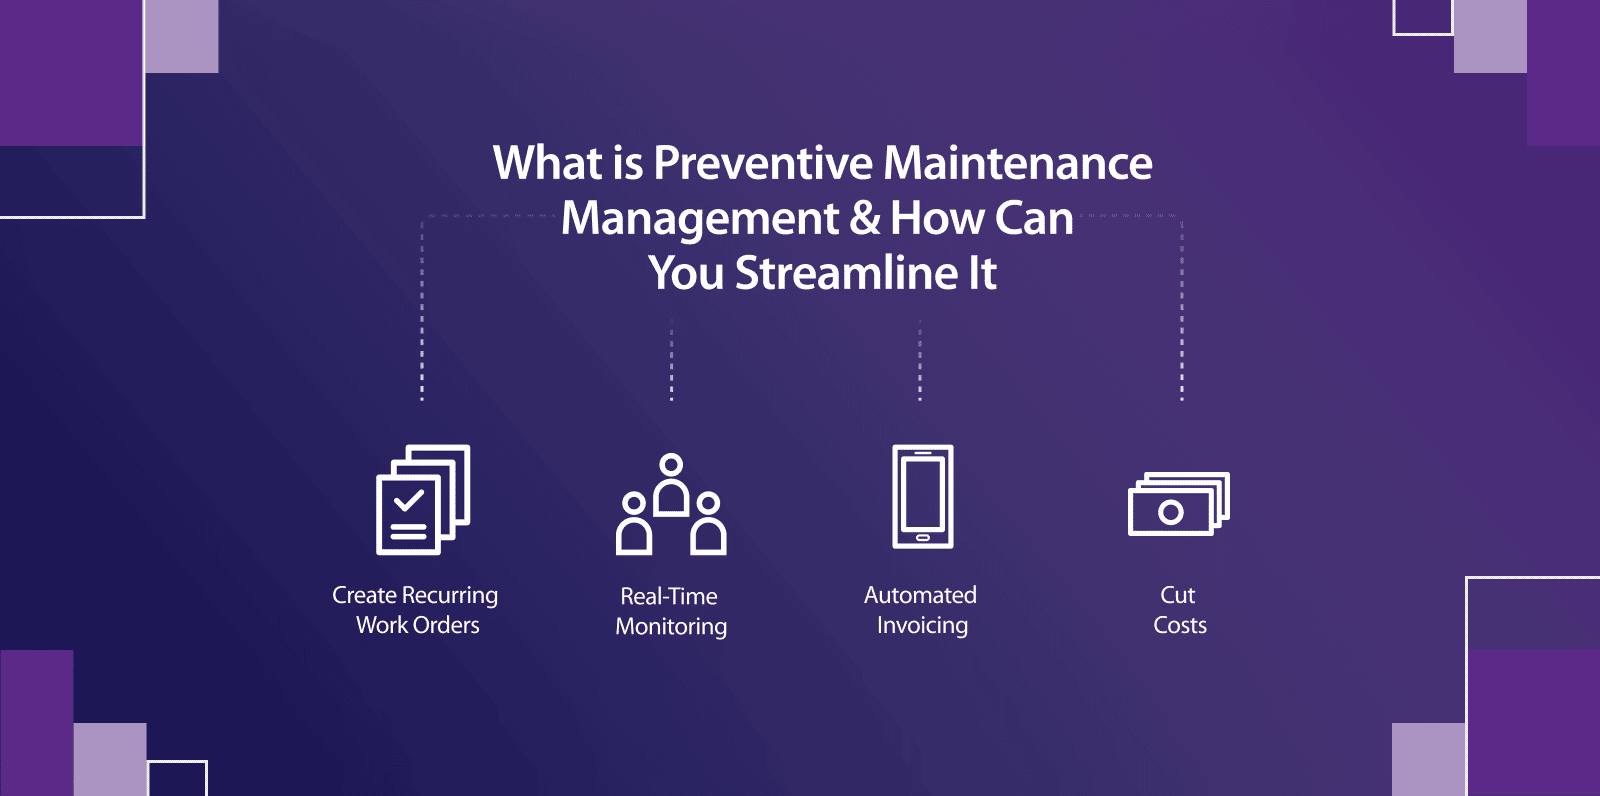 What is Preventive Maintenance Management & How Can You Streamline It